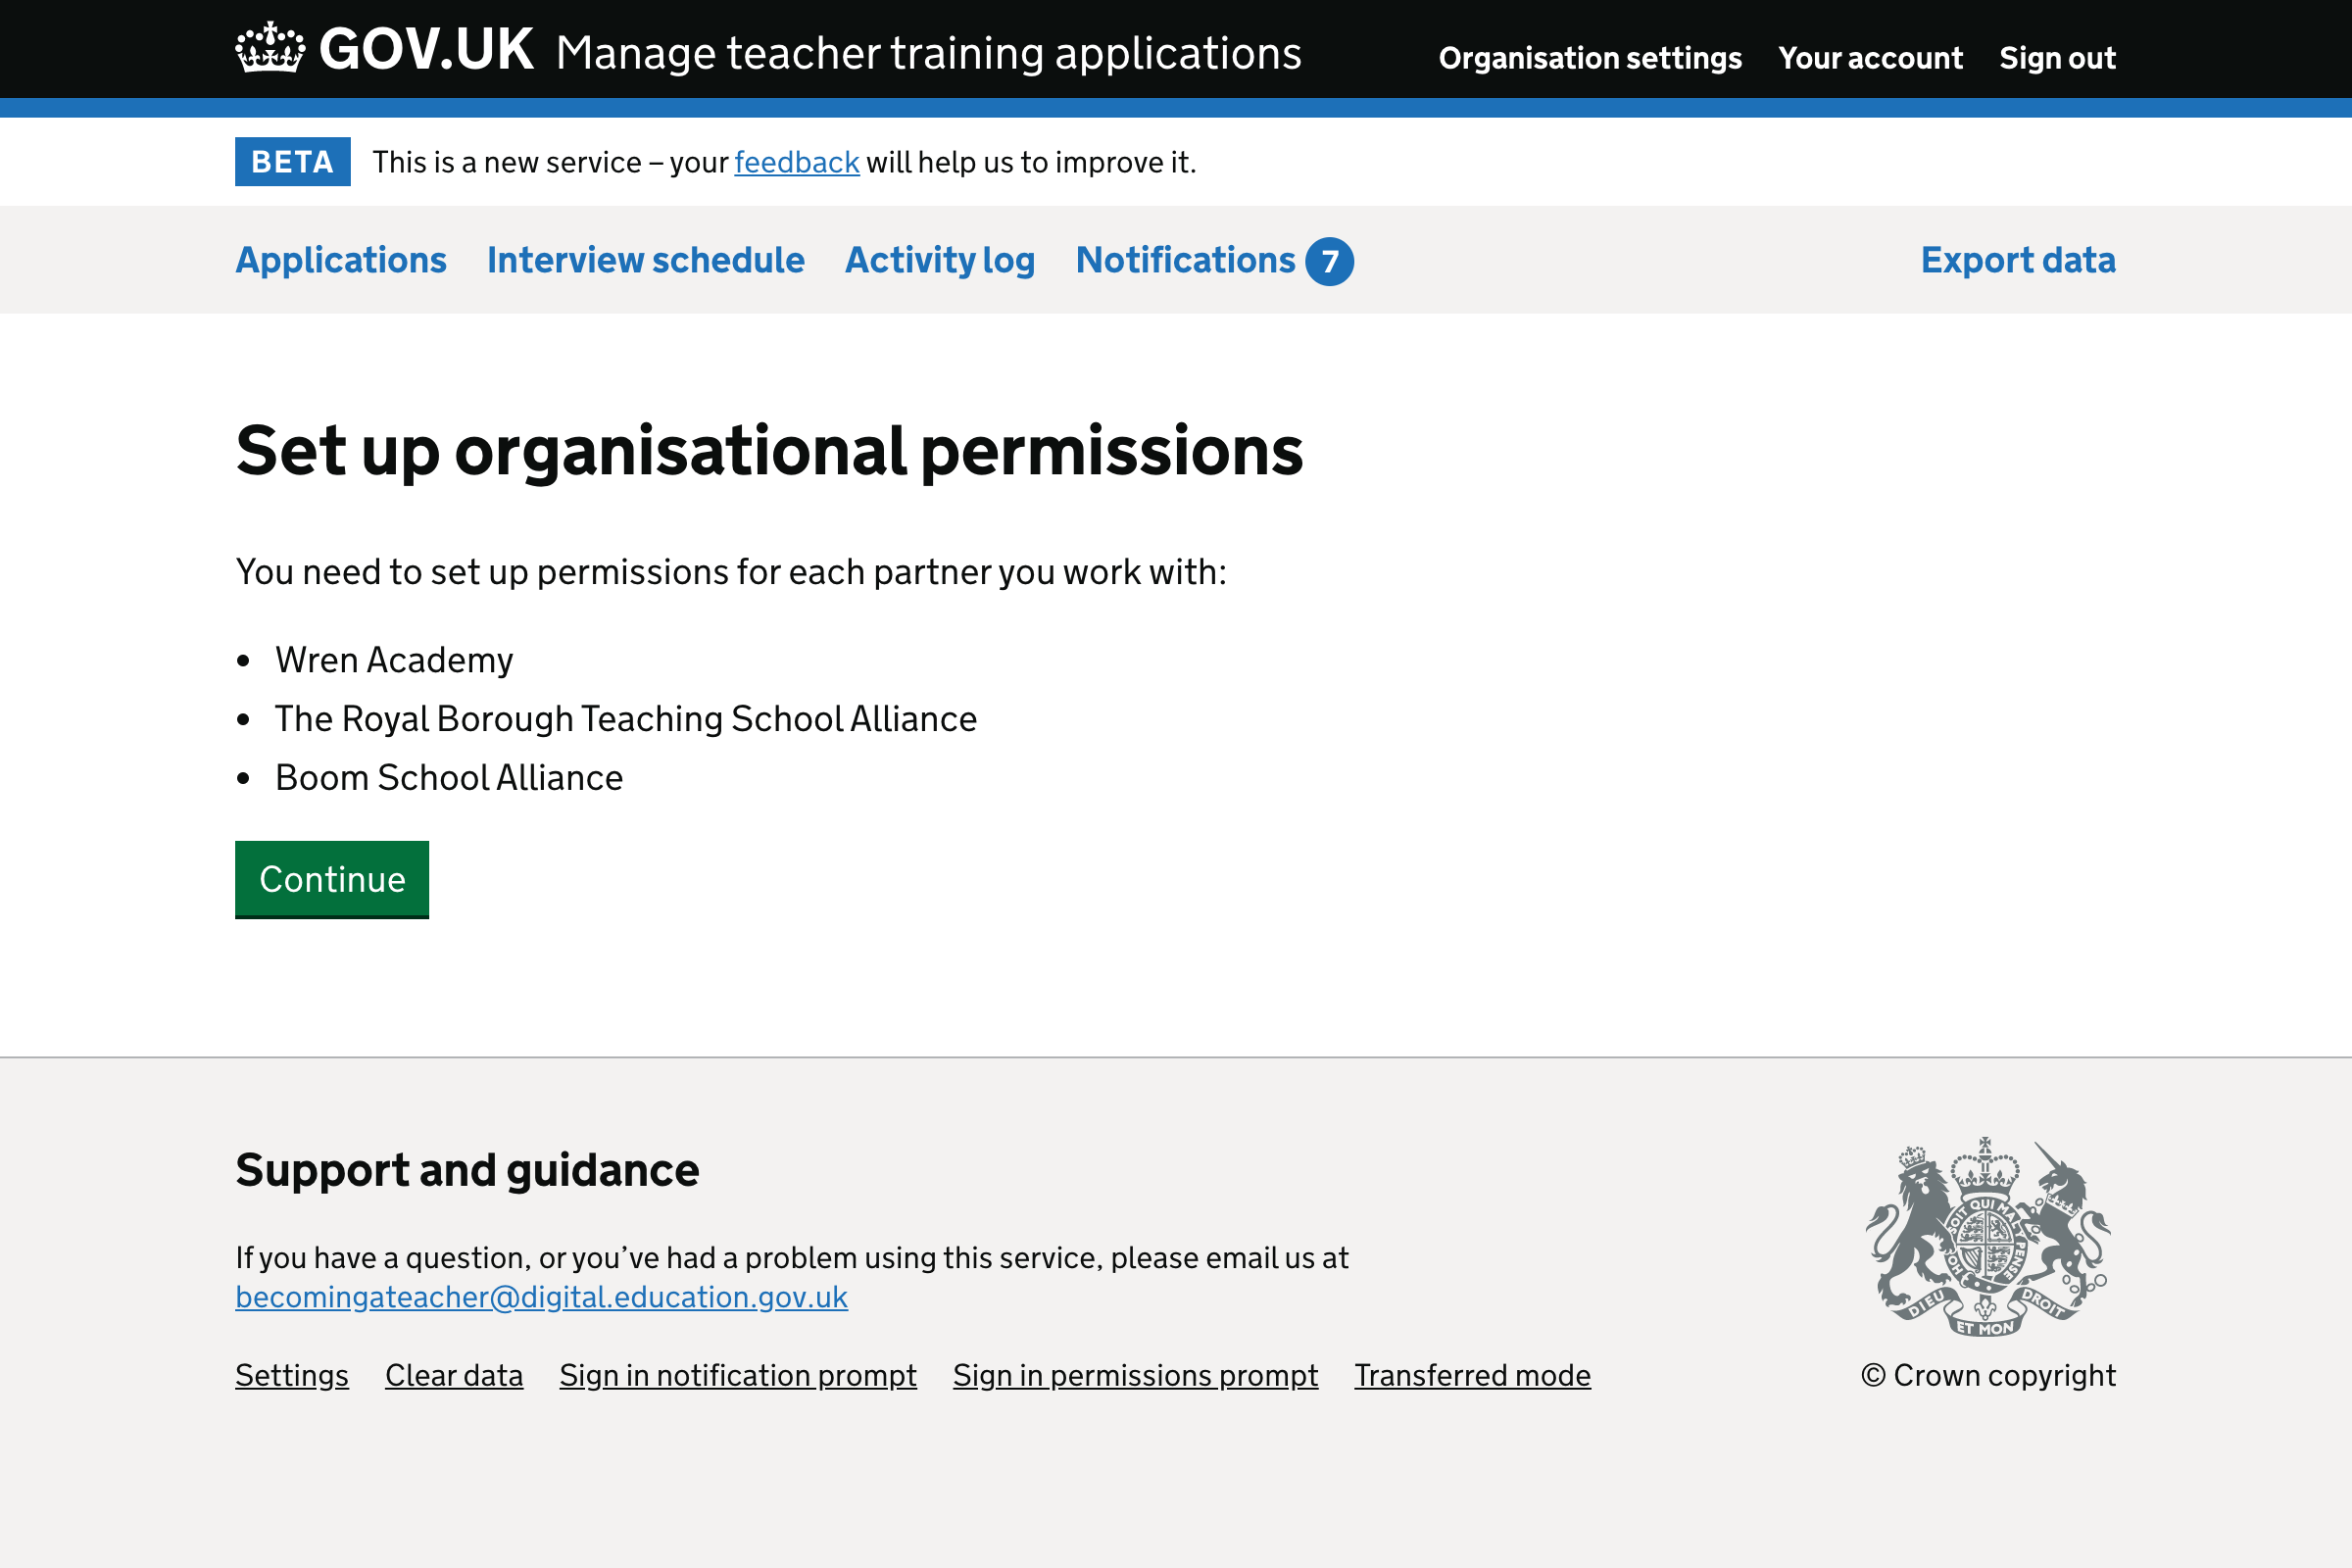 Screenshot of ‘Set up organisational permissions’ page.